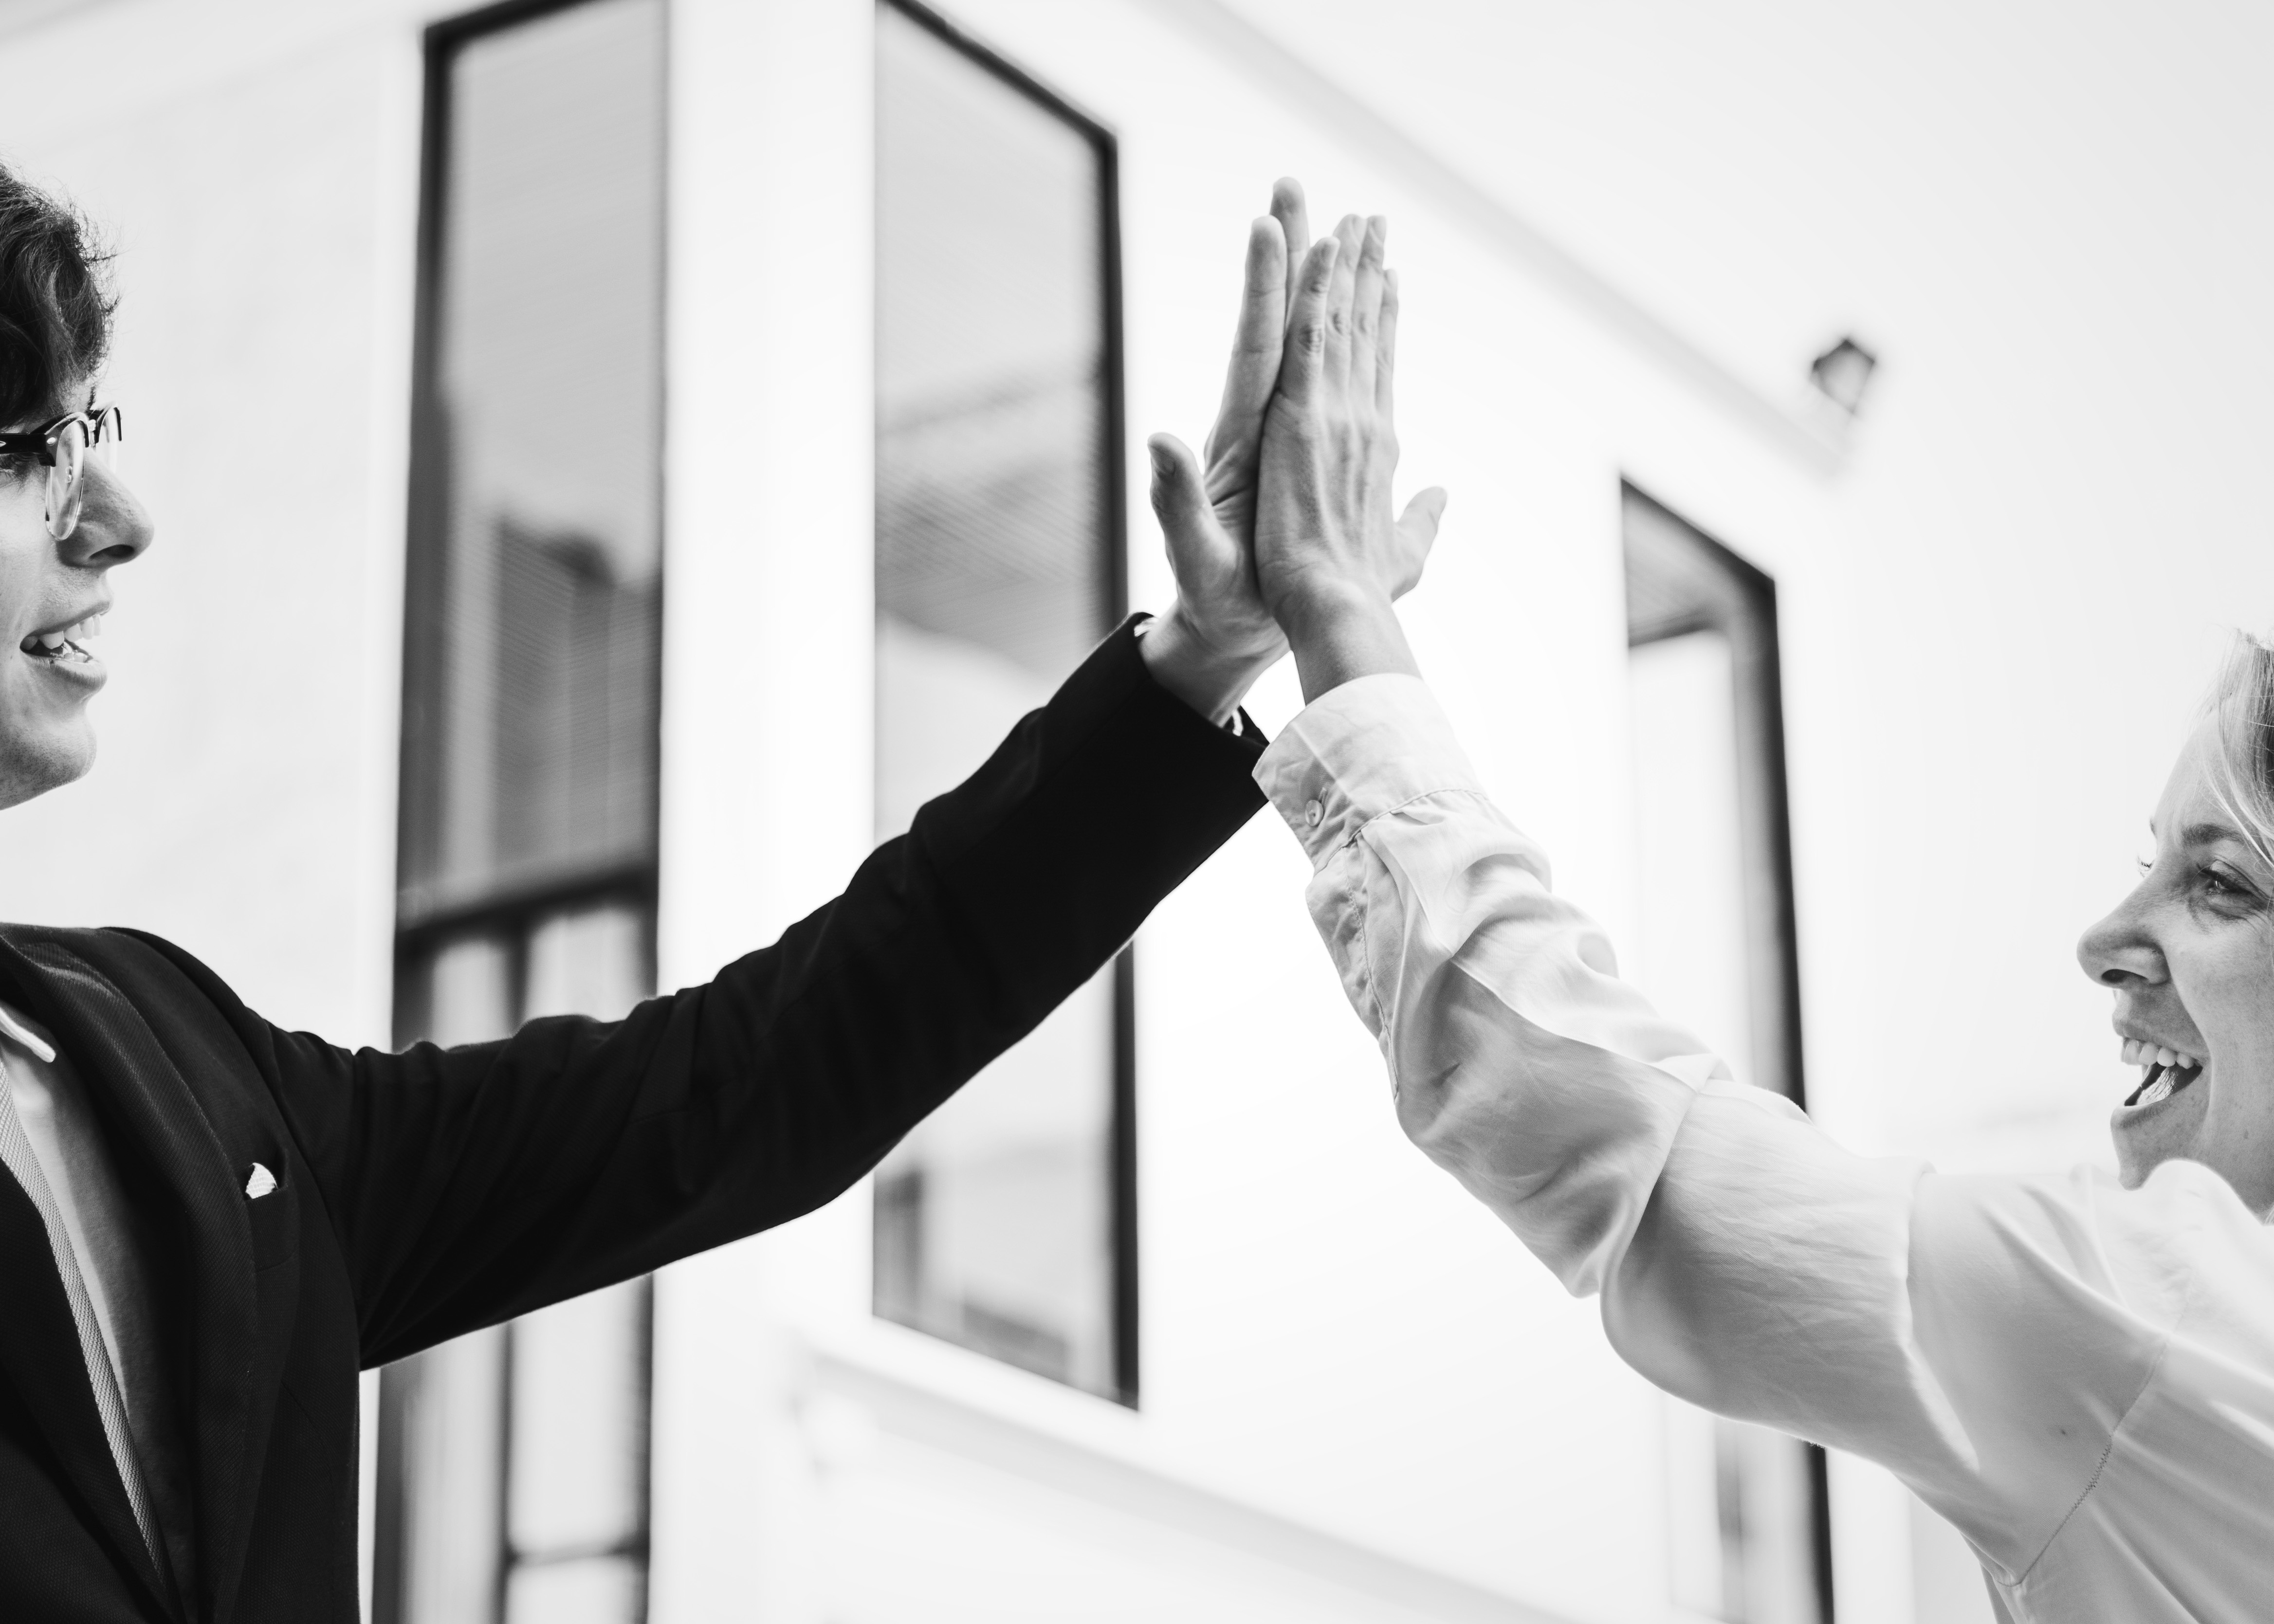 two people doing a high five in black and white